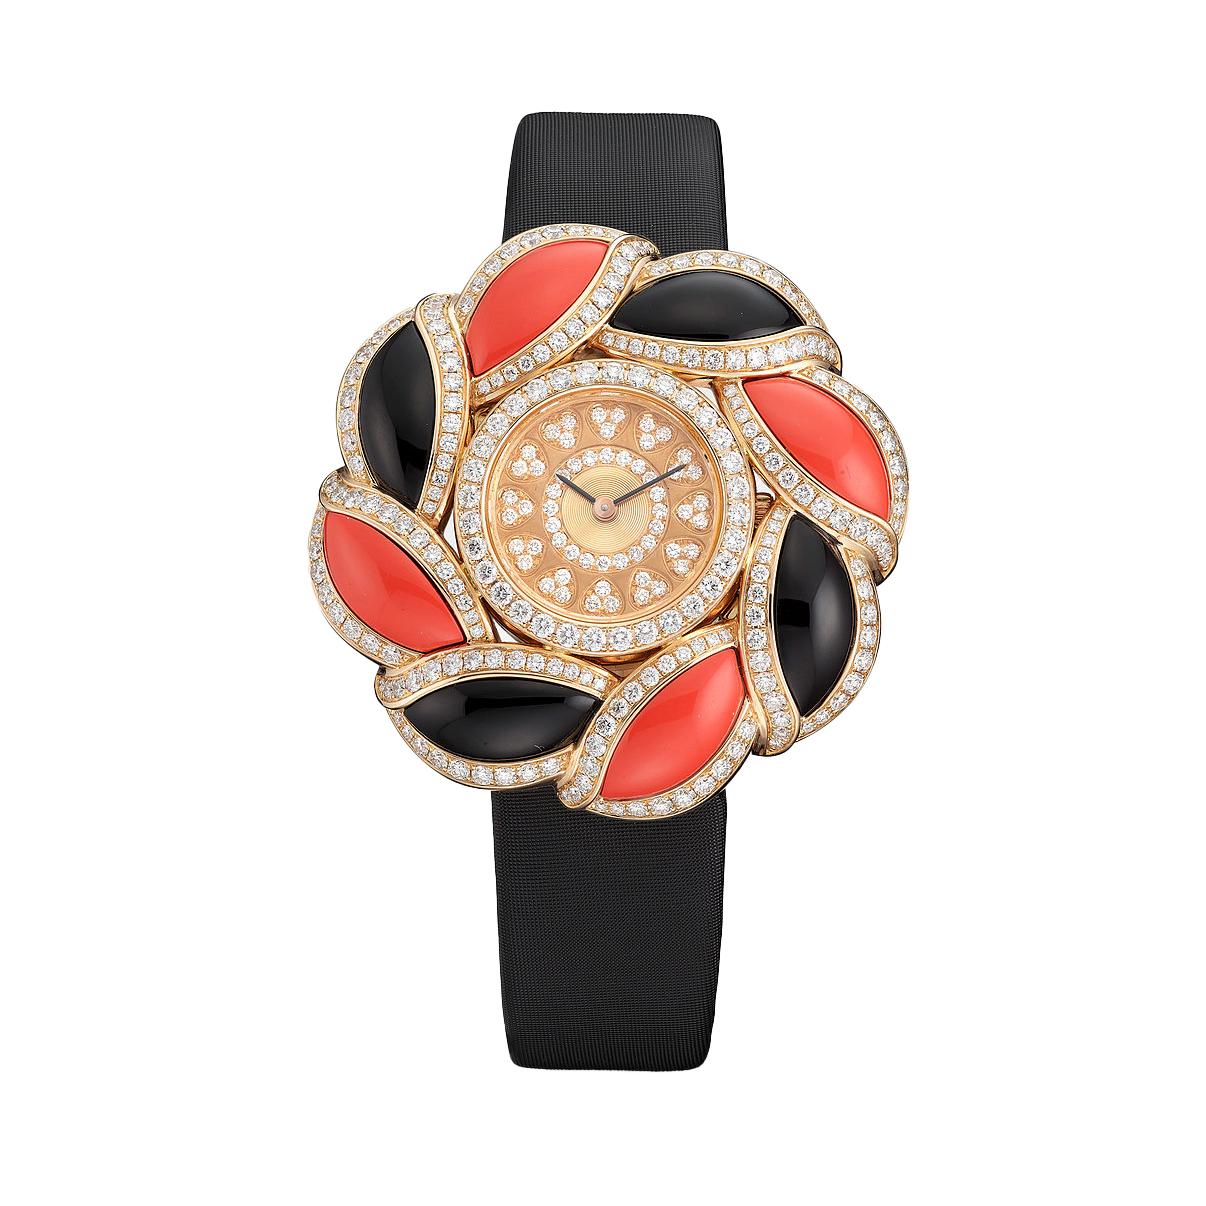 Watch in pink gold 18kt set with 216 diamonds 2.52 cts, 4 onyx 8.21 cts, 4 corail 6.20 cts, dial set with 56 diamonds 0.33 cts satin bracelet quartz movement.       

We do not guarantee the functioning of this watch.